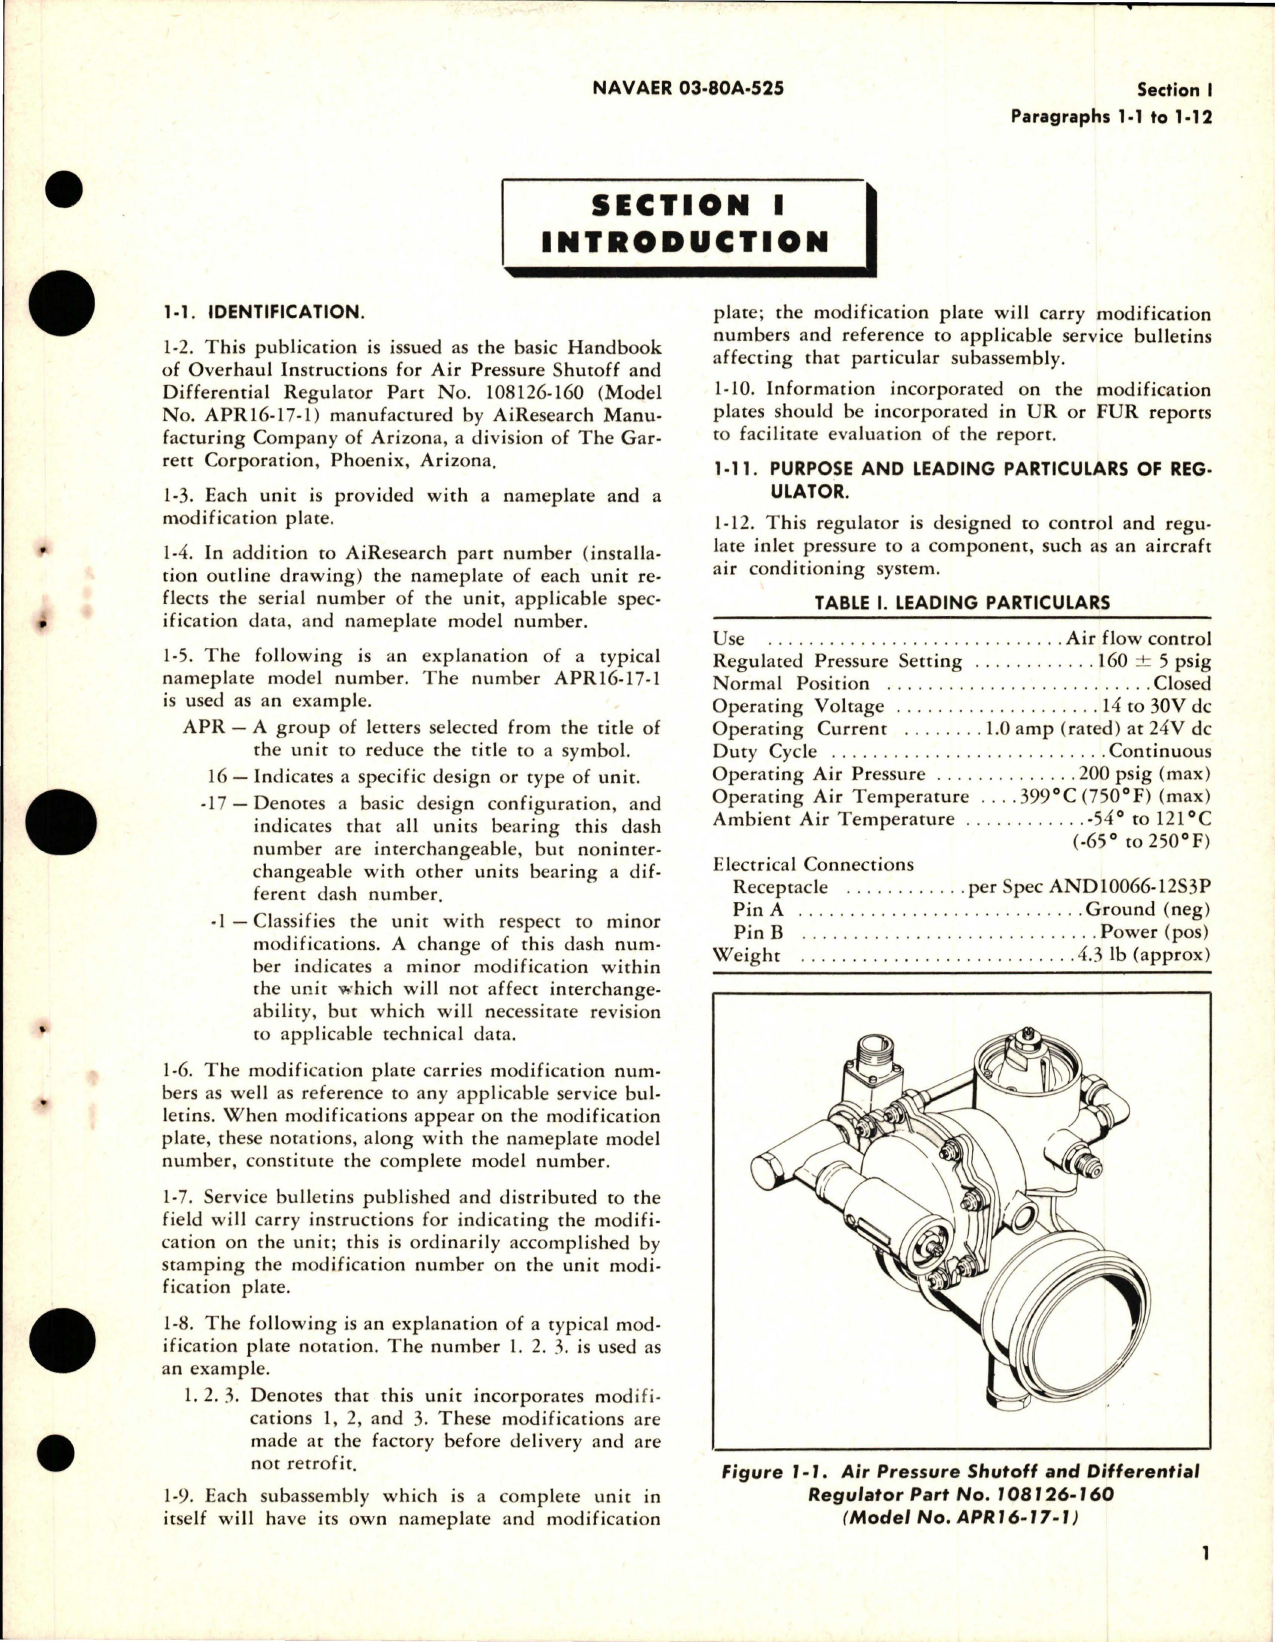 Sample page 5 from AirCorps Library document: Overhaul Instructions for Air Pressure Shutoff and Differential Regulator - Part 108126-160 - Model APR16-17